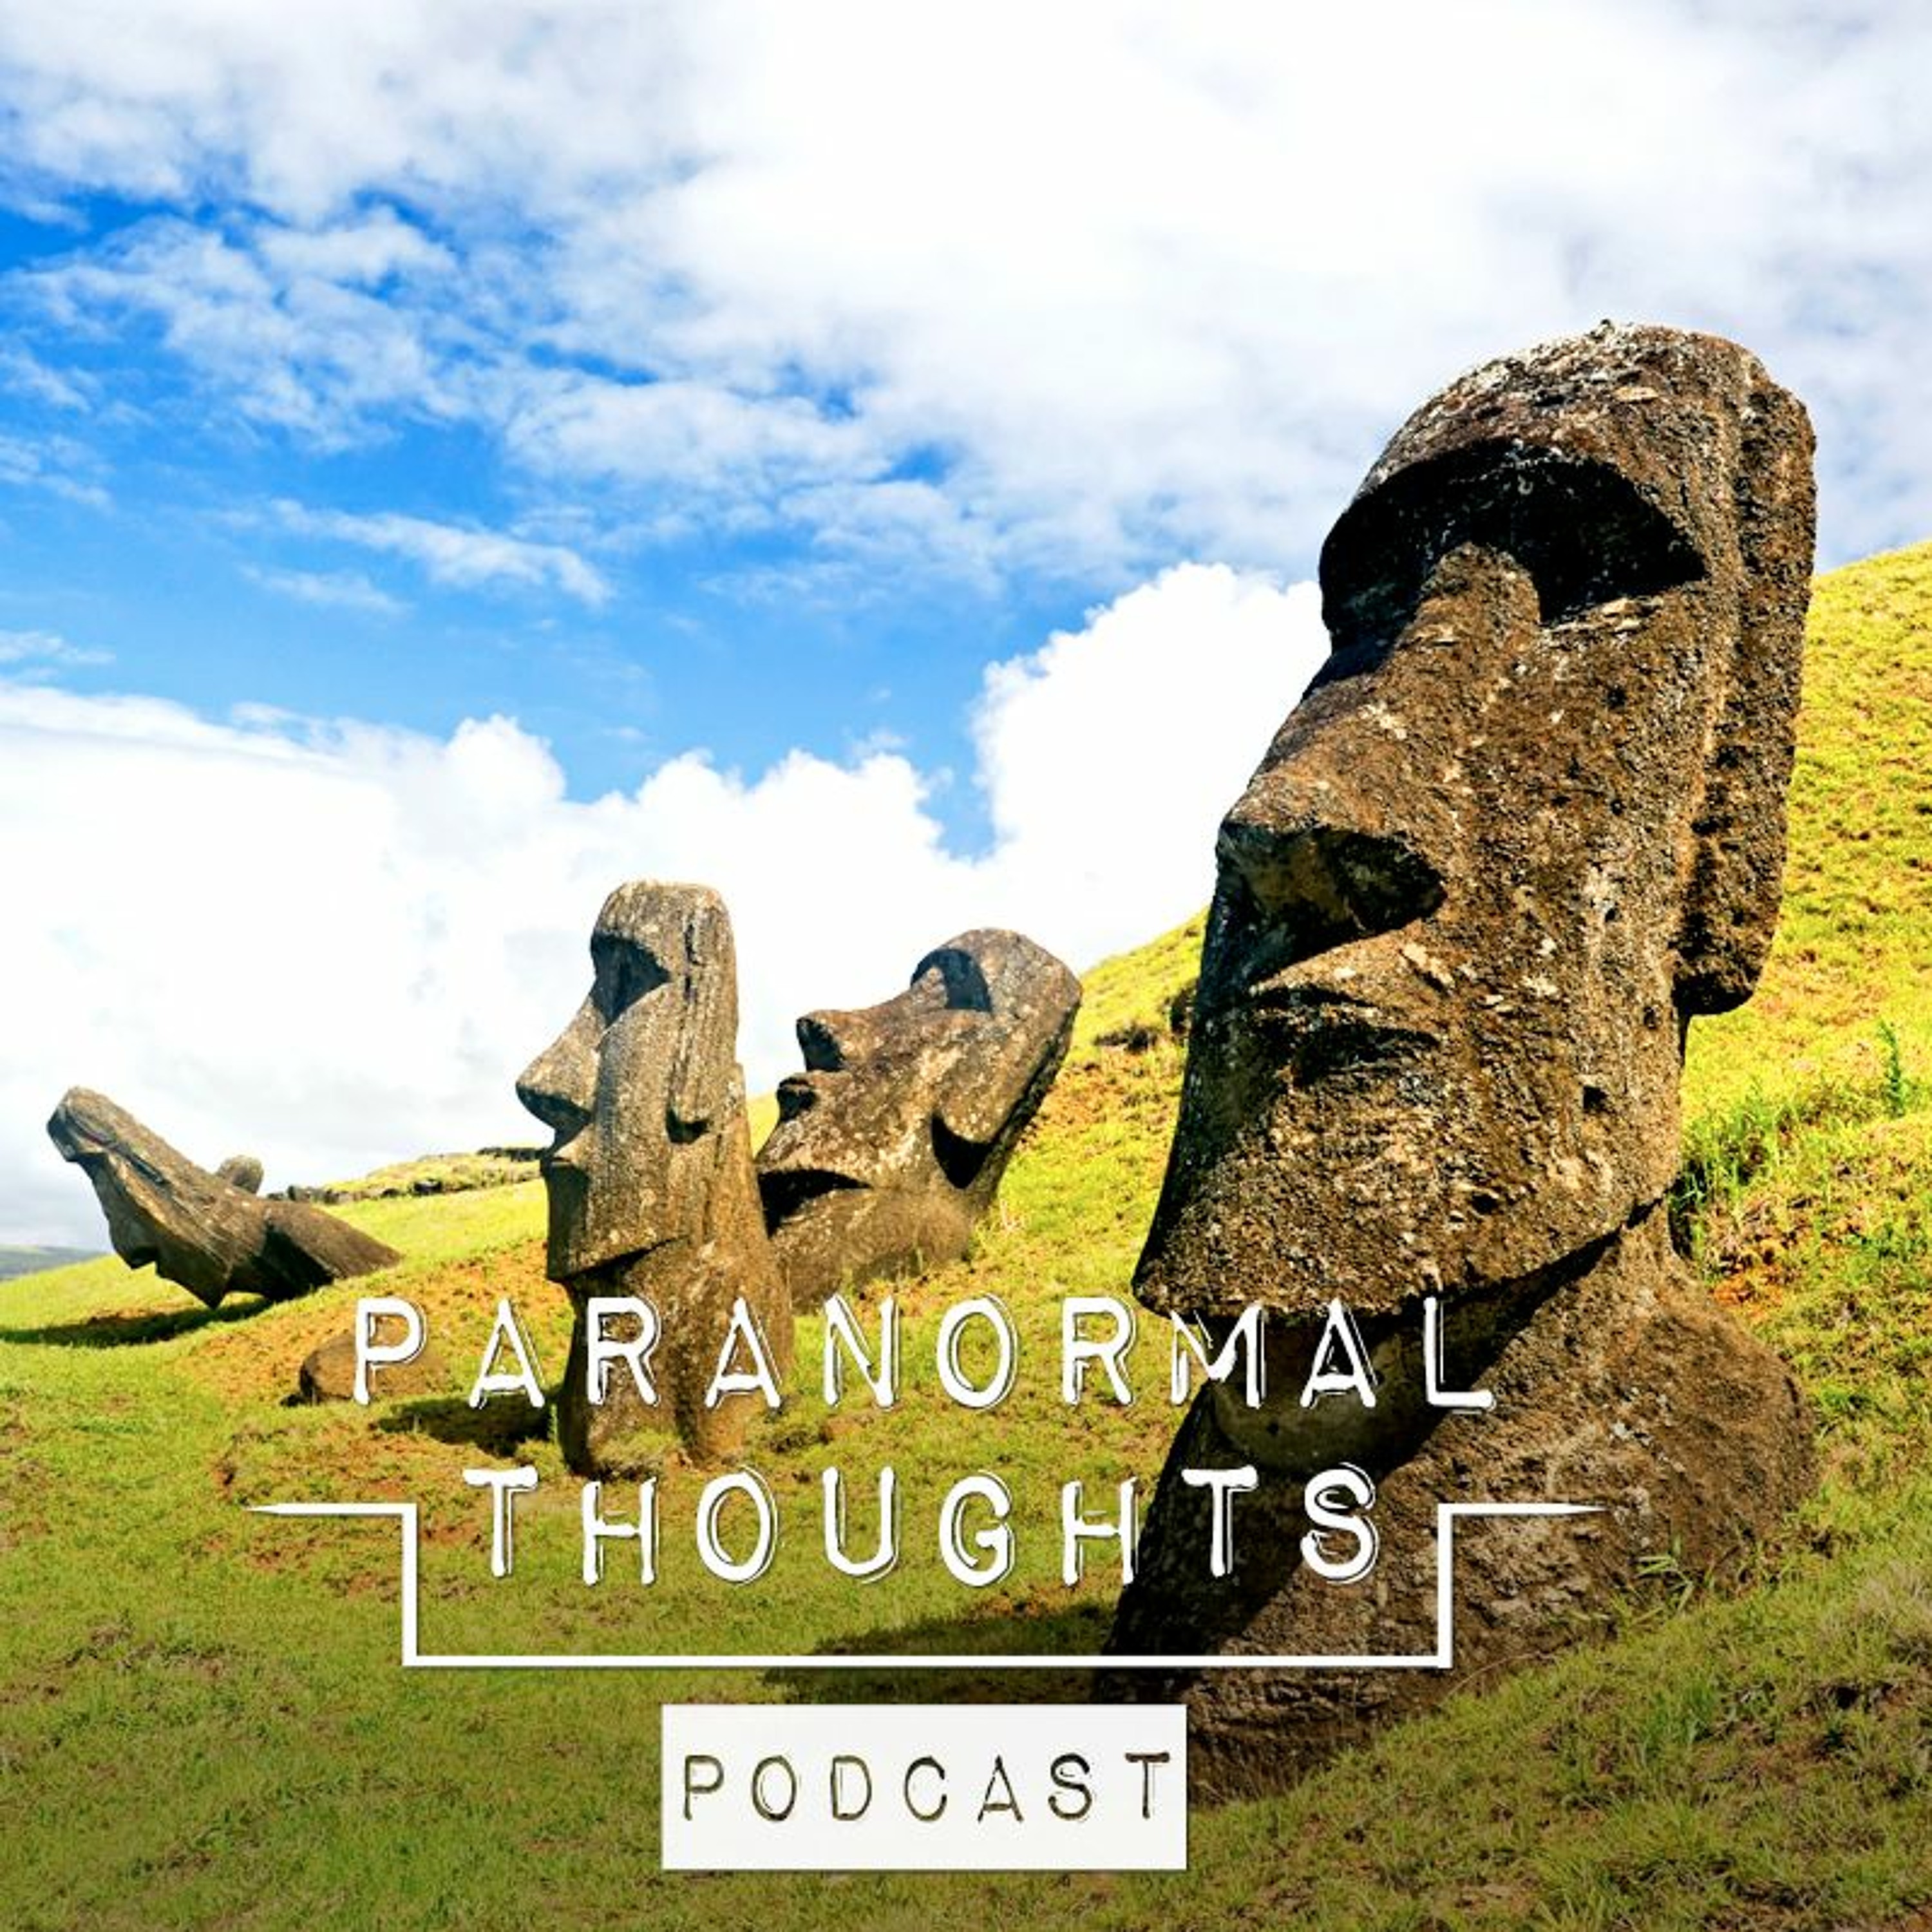 The Mysteries of Easter Island Podcast